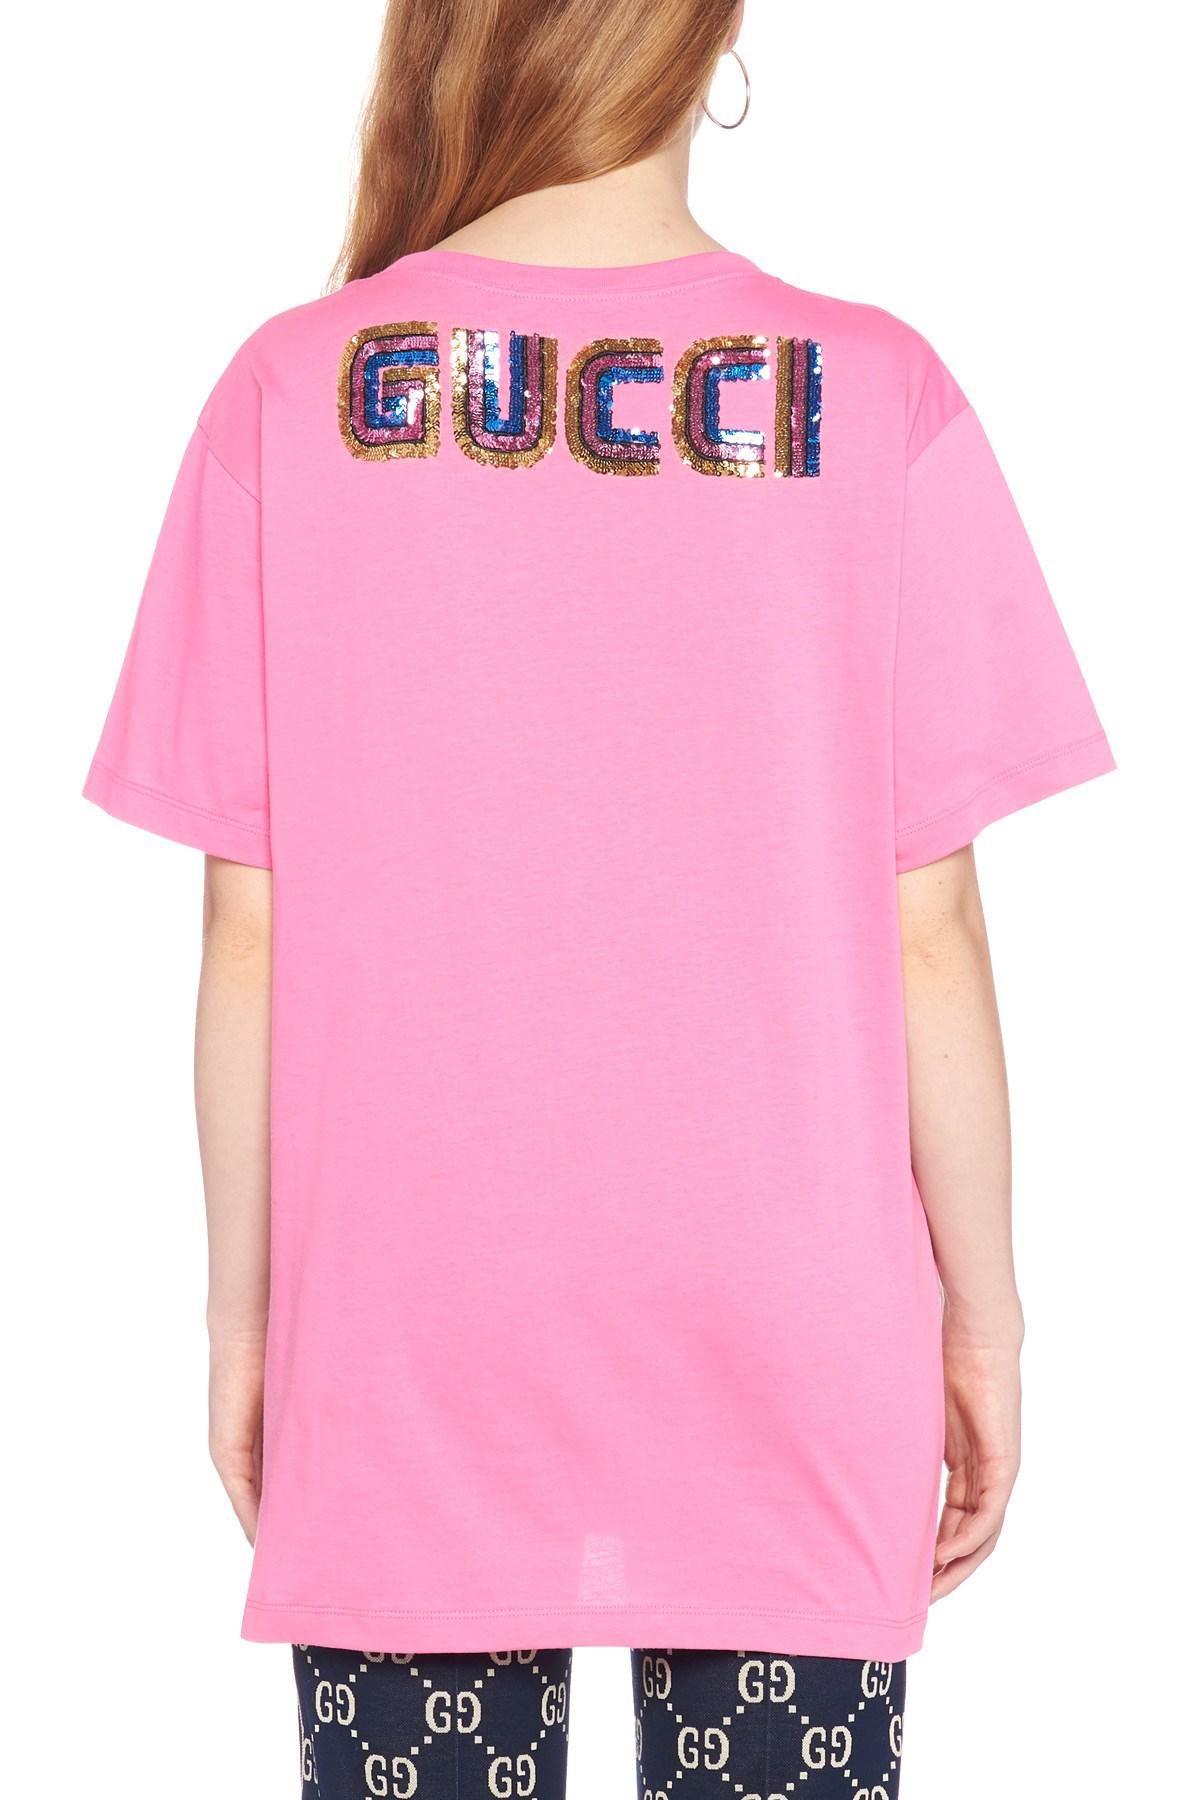 Gucci Pink Printed Cotton T-shirt - Lyst